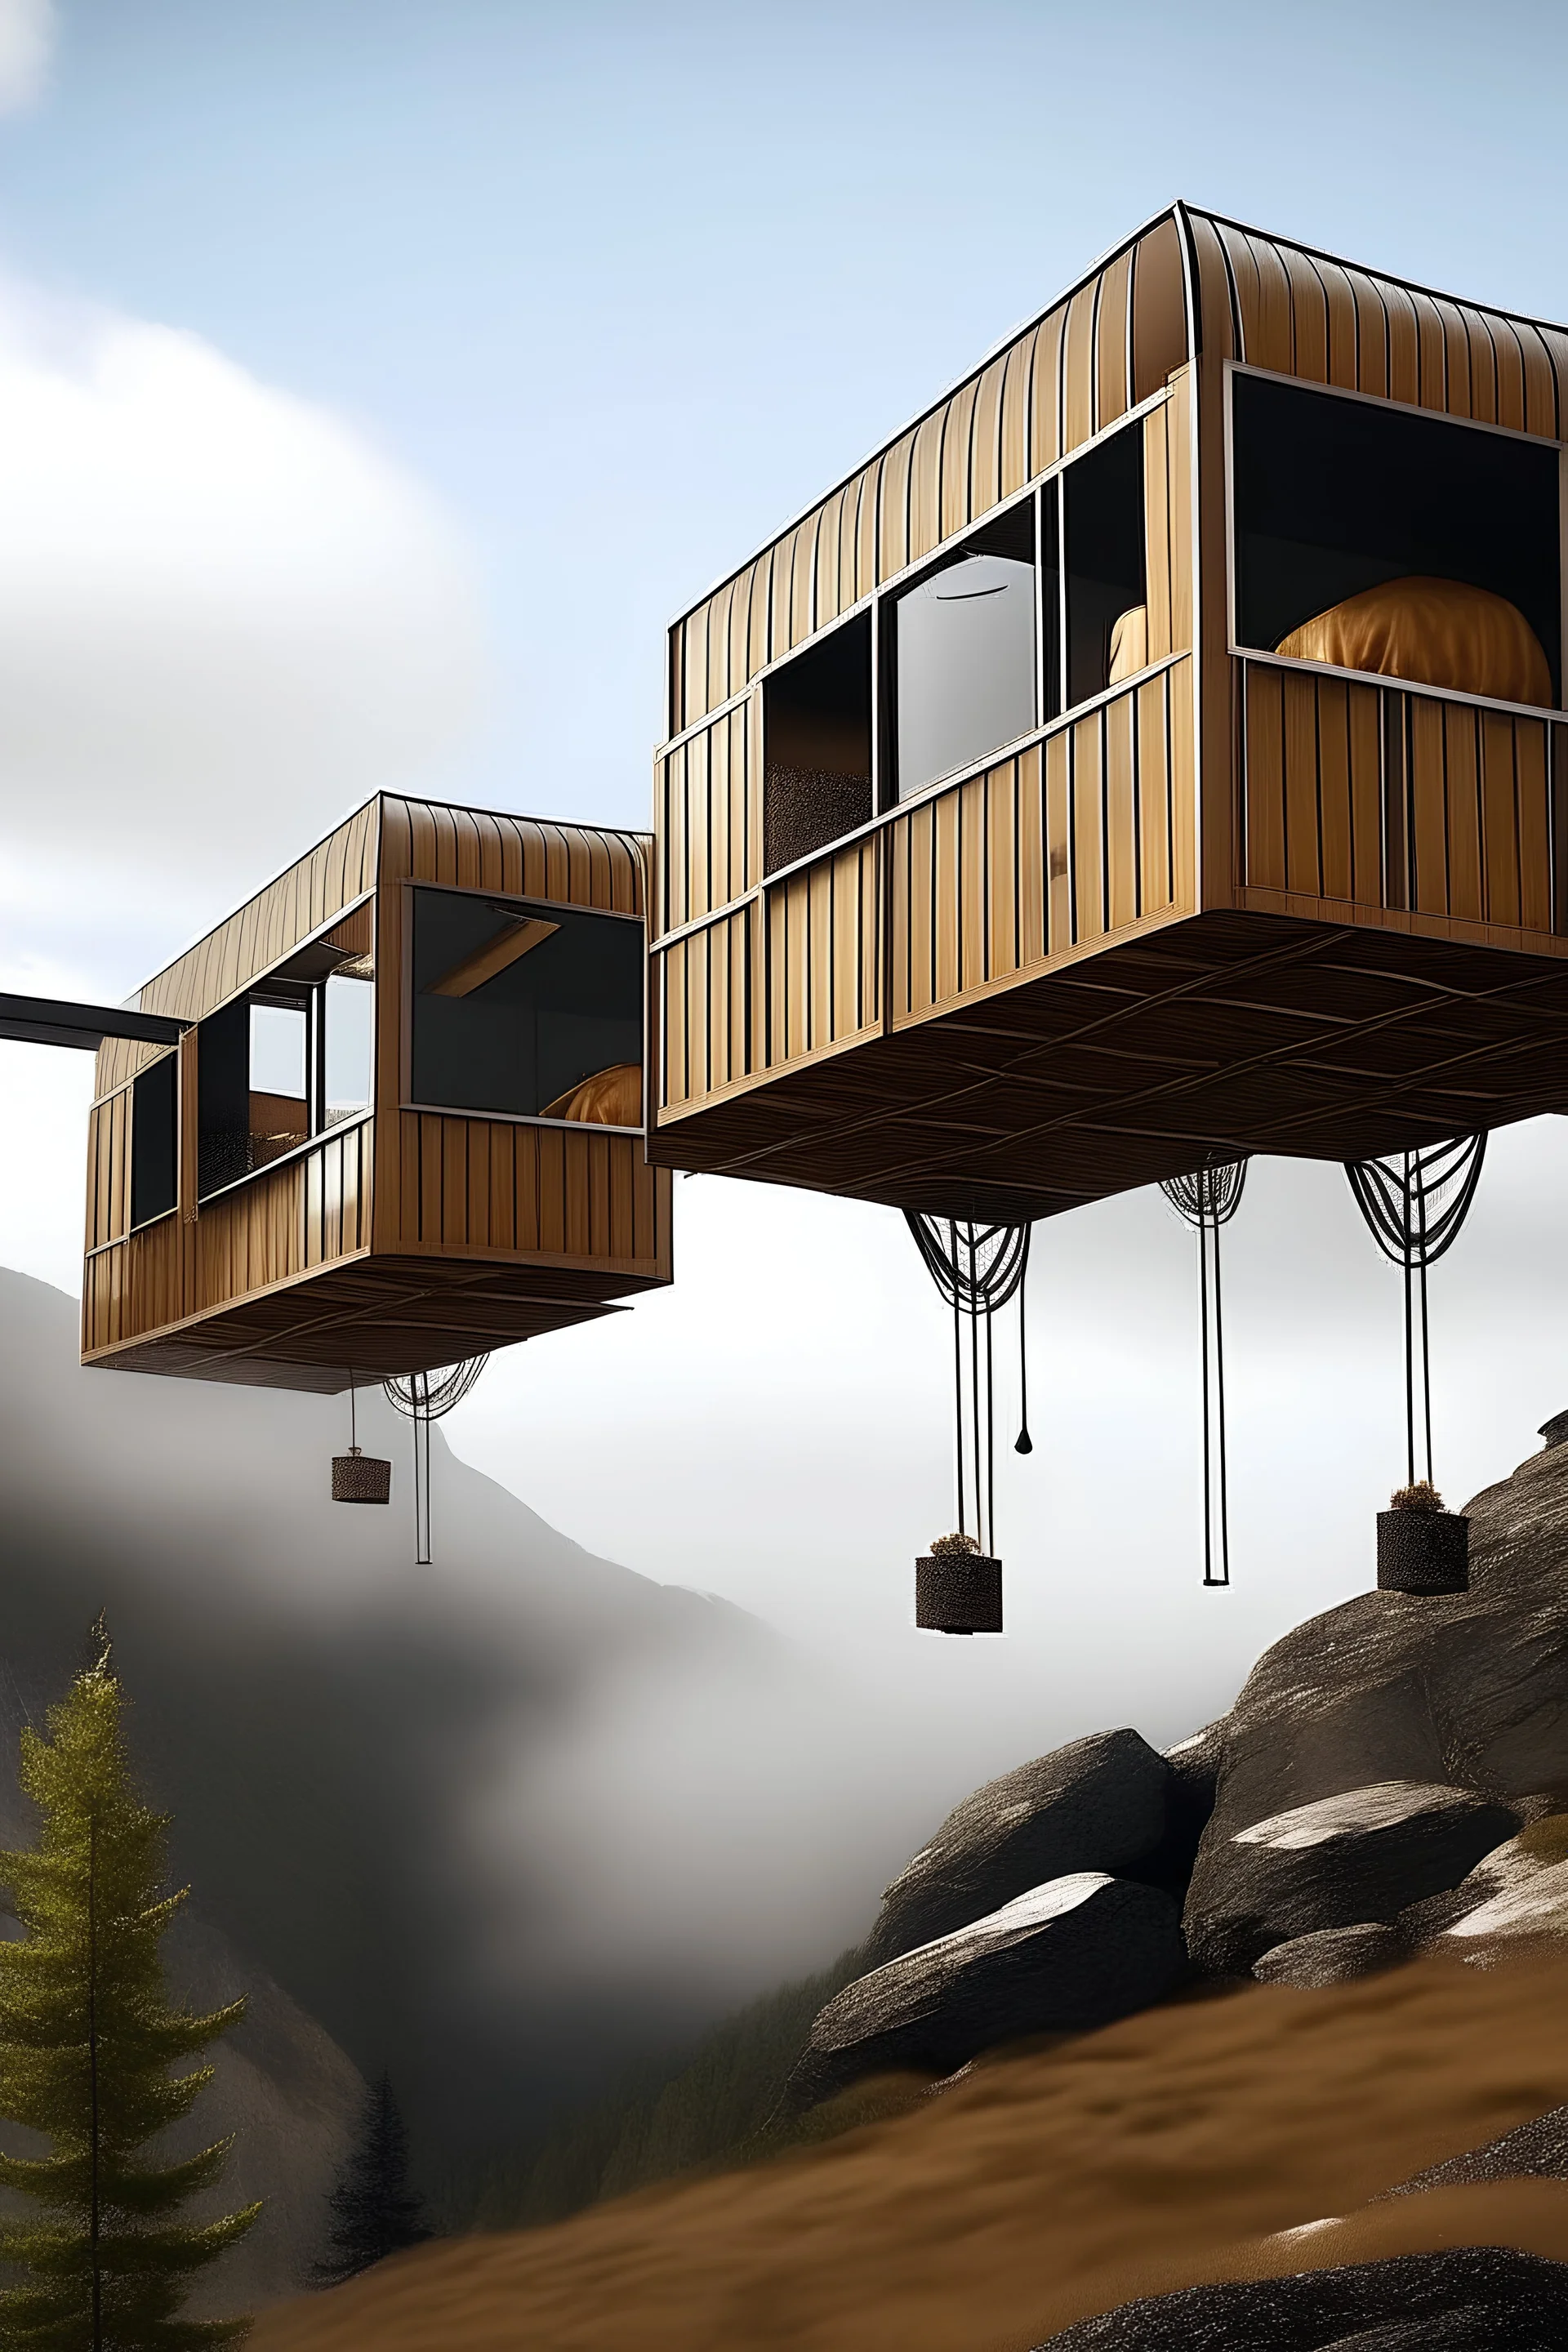 Capsules rooms suspended in the air and attached to the brown mountain by solid bars.